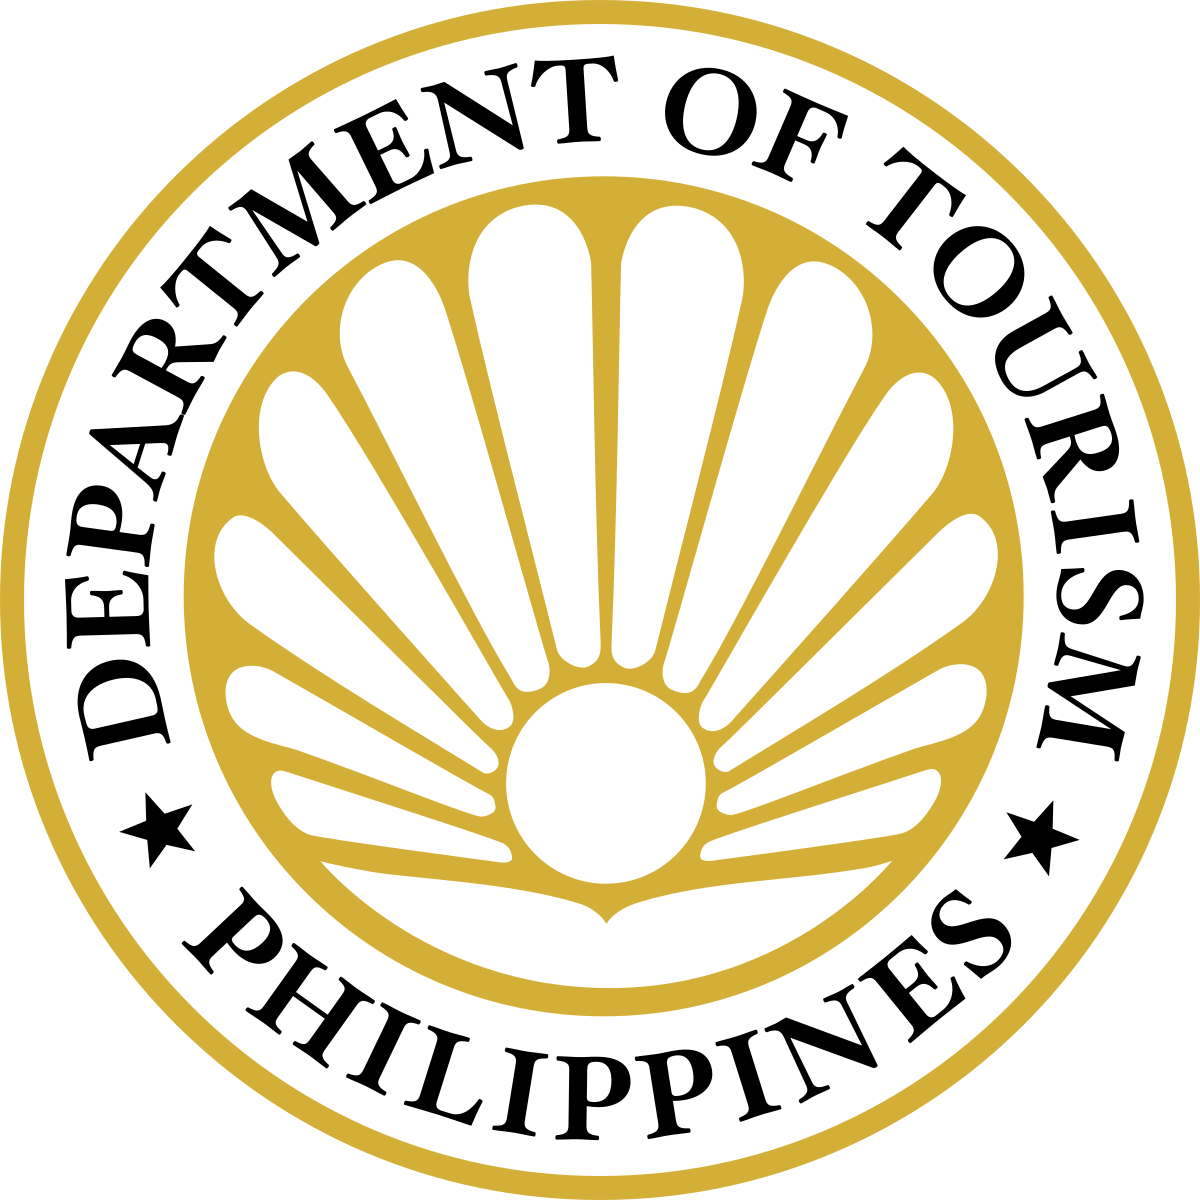 tourism related professional organizations in the philippines